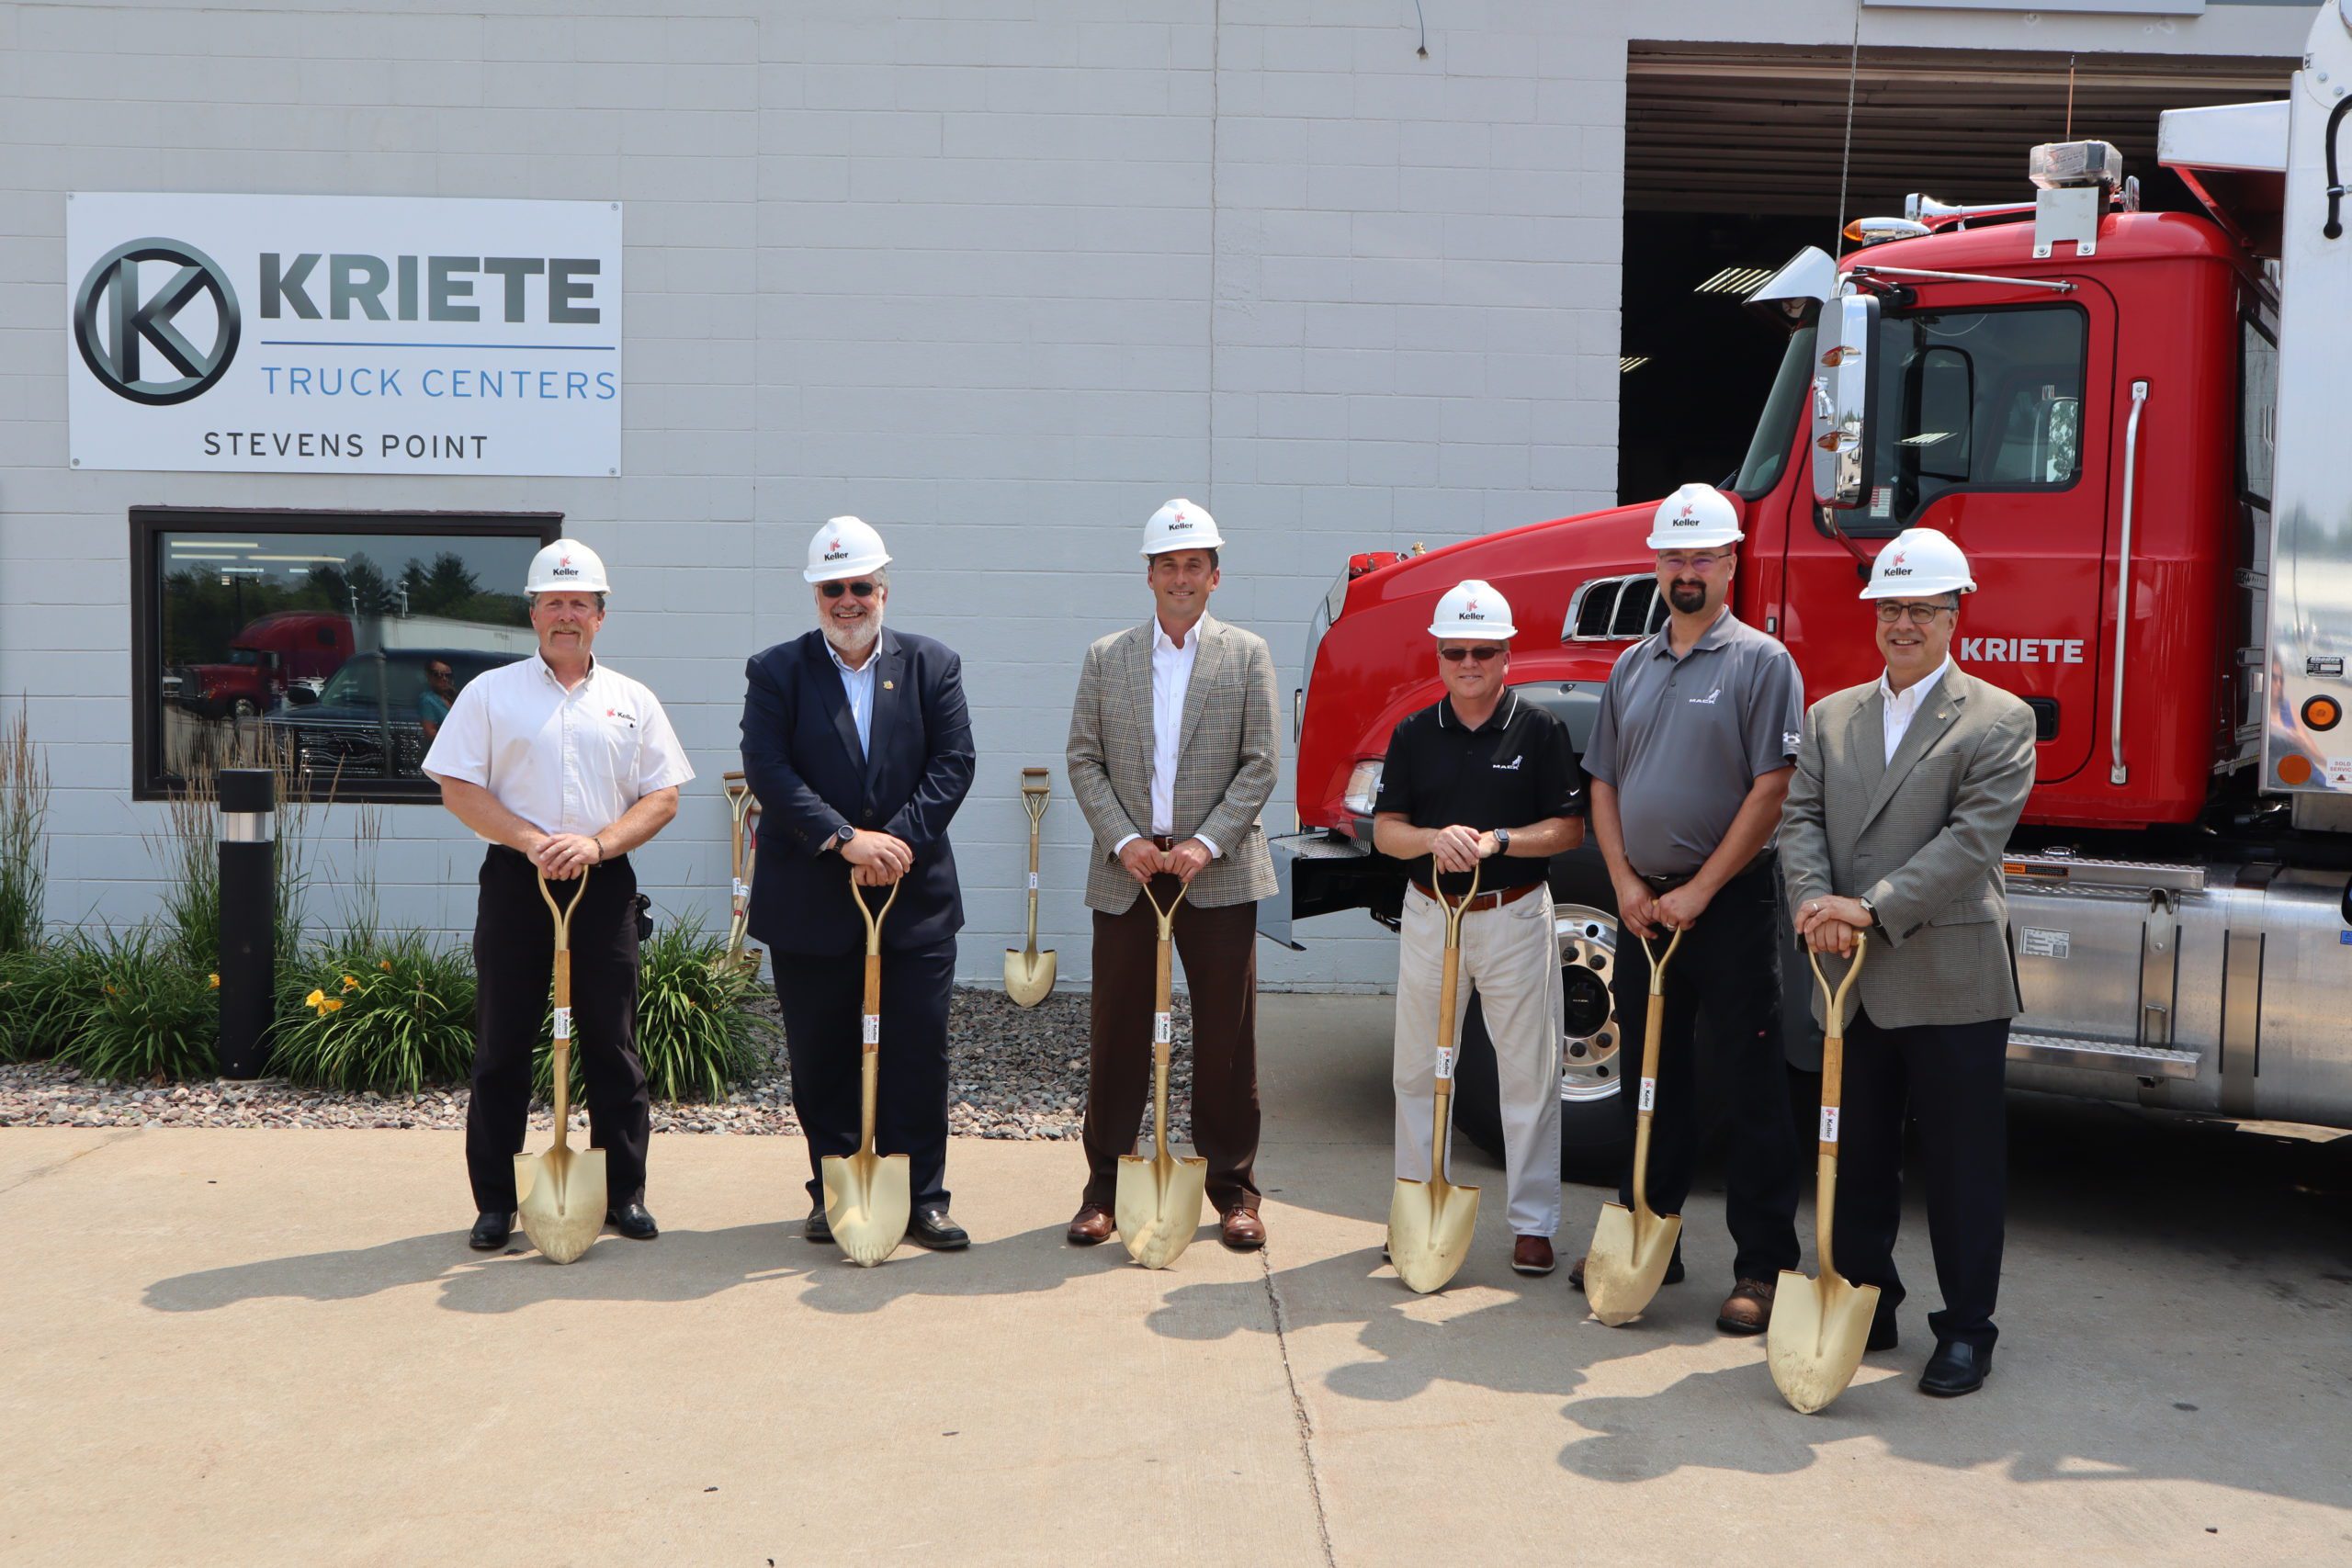 Construction team holding gold shovels at groundbreaking for Kriete Truck Centers project